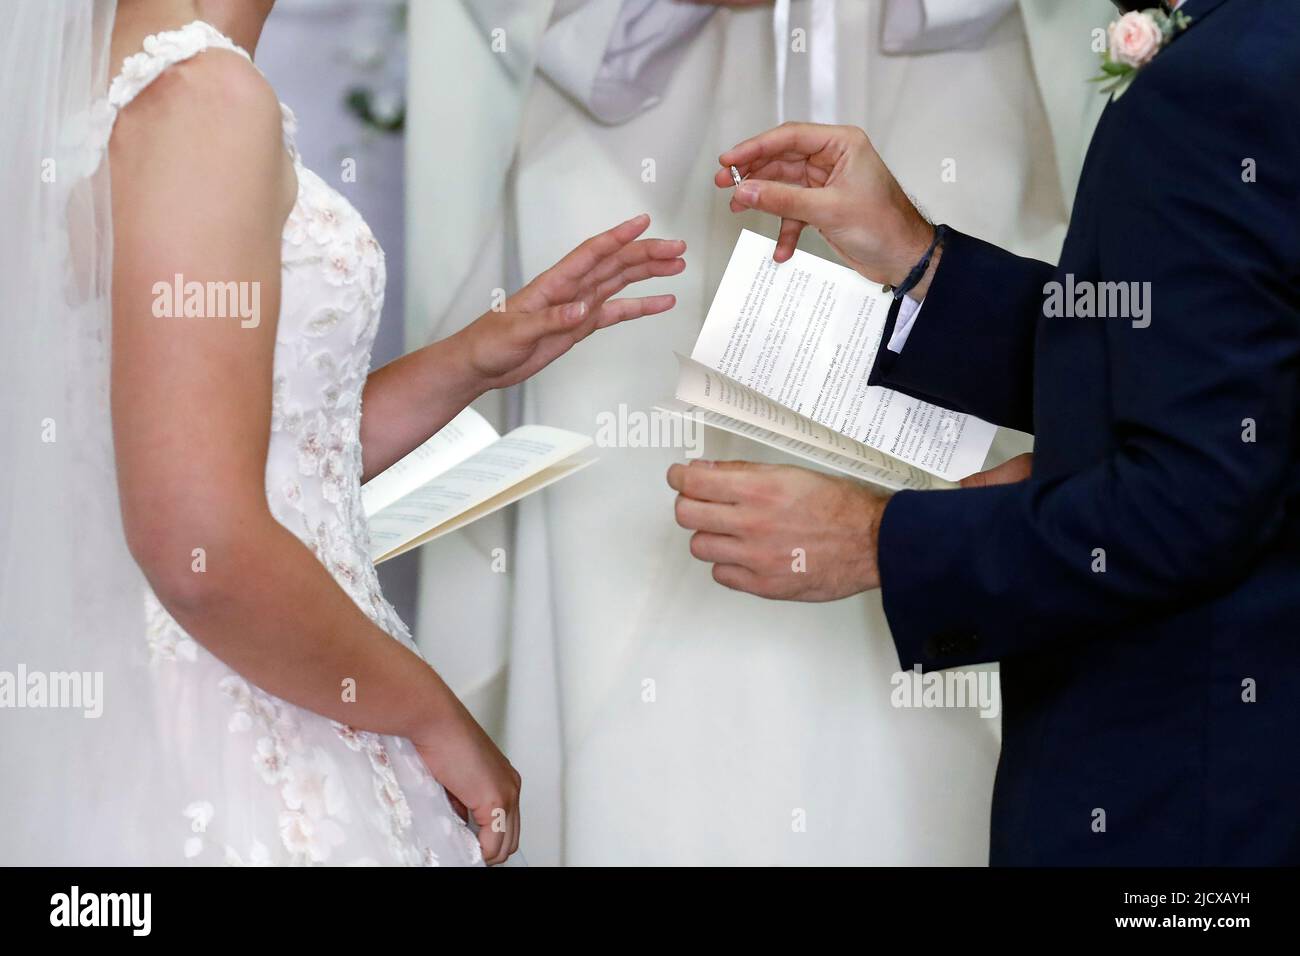 Wedding ceremony in a Catholic church, wedding rings being exchanged, France, Europe Stock Photo